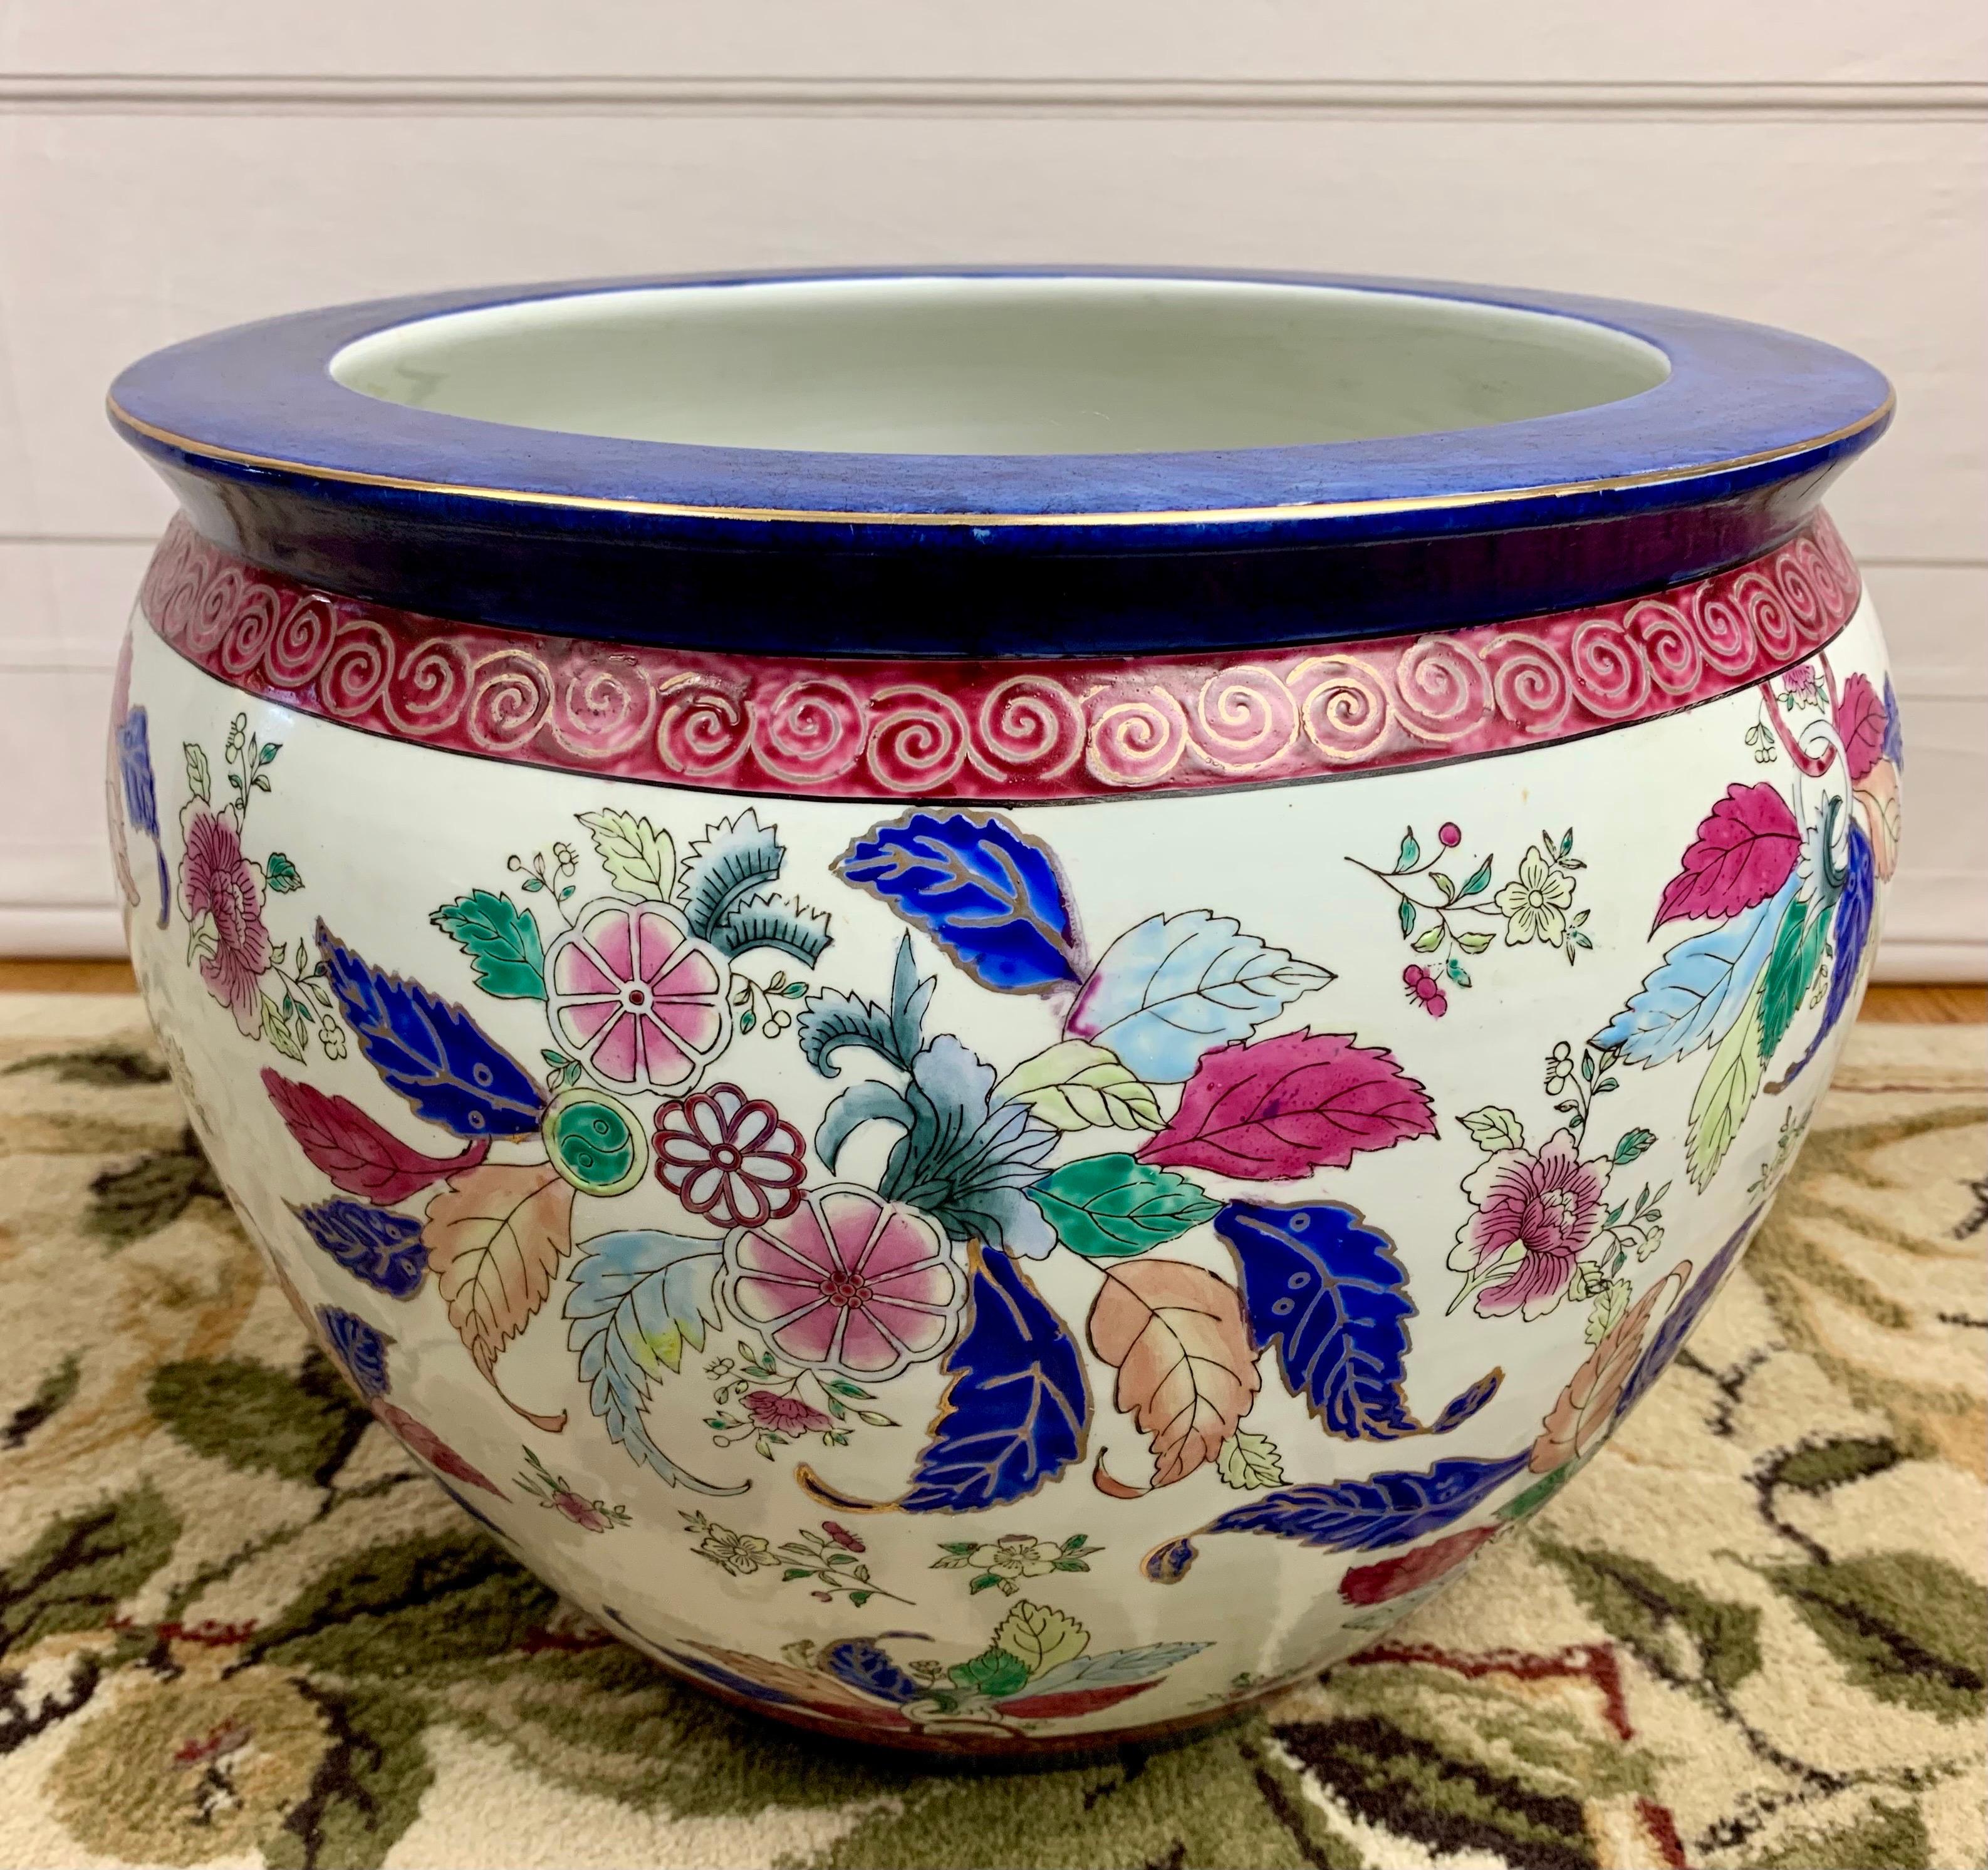 A beautiful chinoiserie fish bowl with a rich color palette featuring shades of blue, green, tan burgundy/mauve on a crisp white background. Fitted with a glass top (included) for versatility. 

Made in China circa 1940. 

Excellent condition with